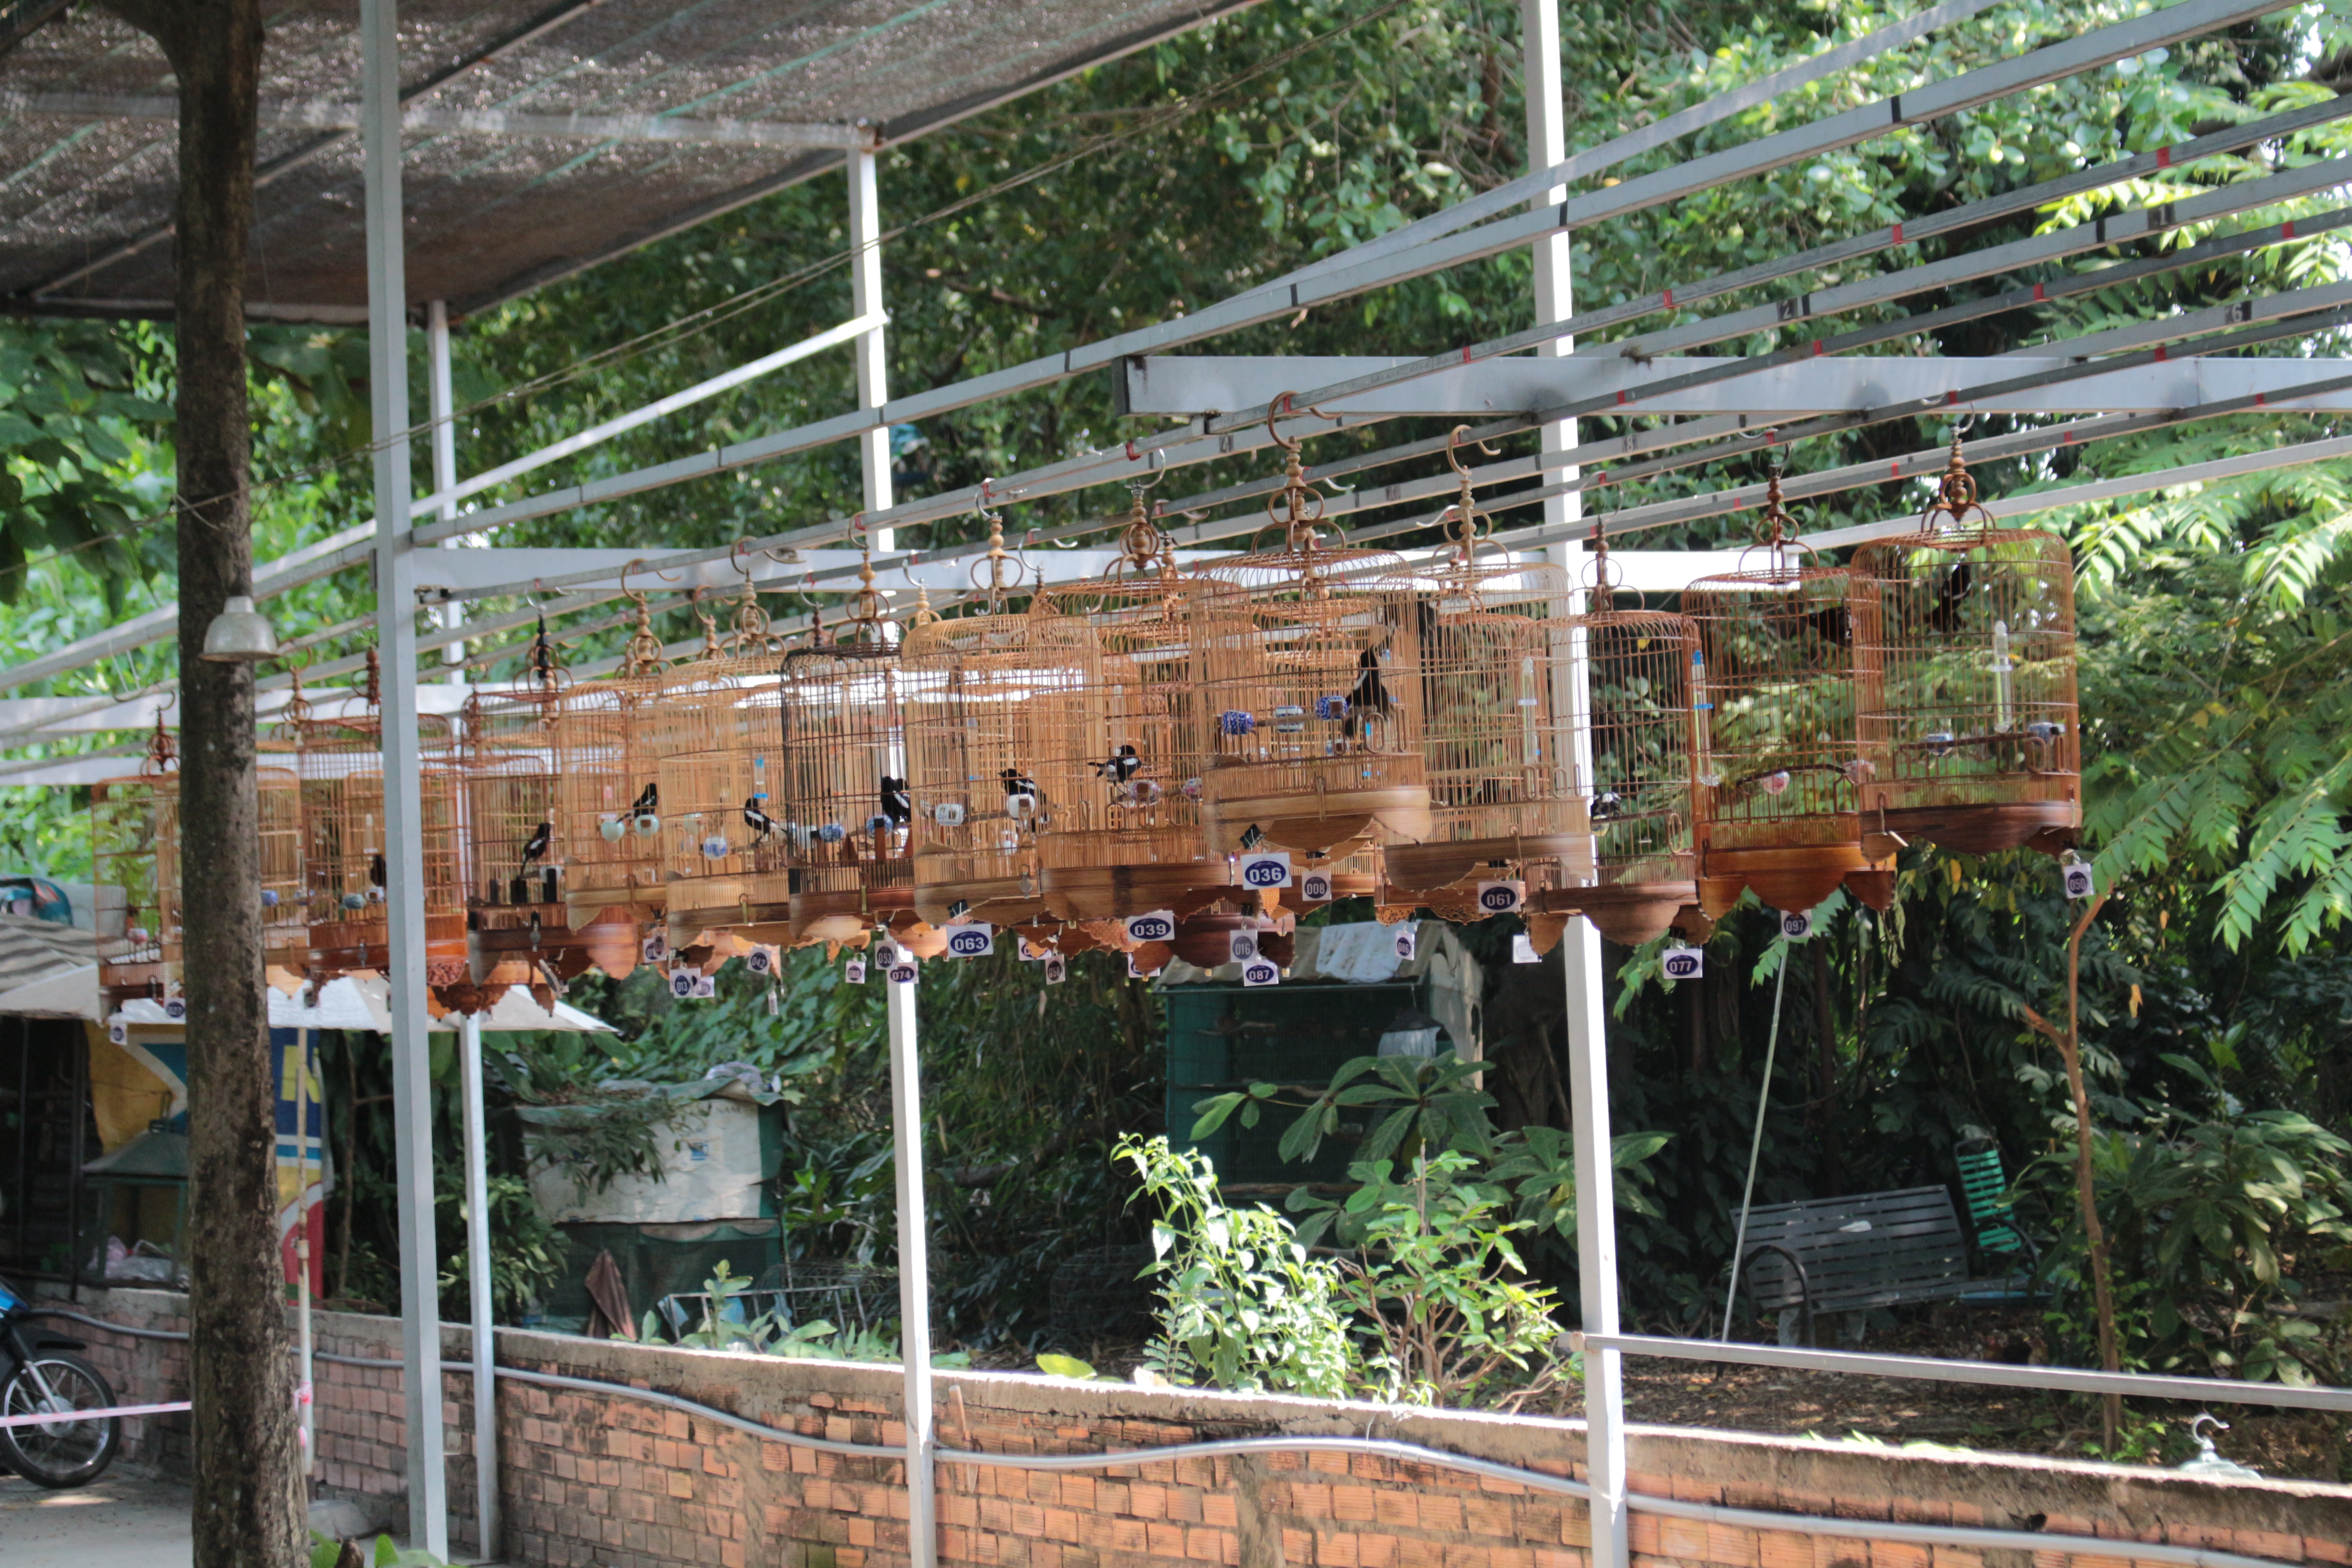 Birds in cages at the cafe next to Cafe Chợ Đồ Cổ in Binh Thanh District, Ho Chi Minh City. Photo: Ray Kuschert